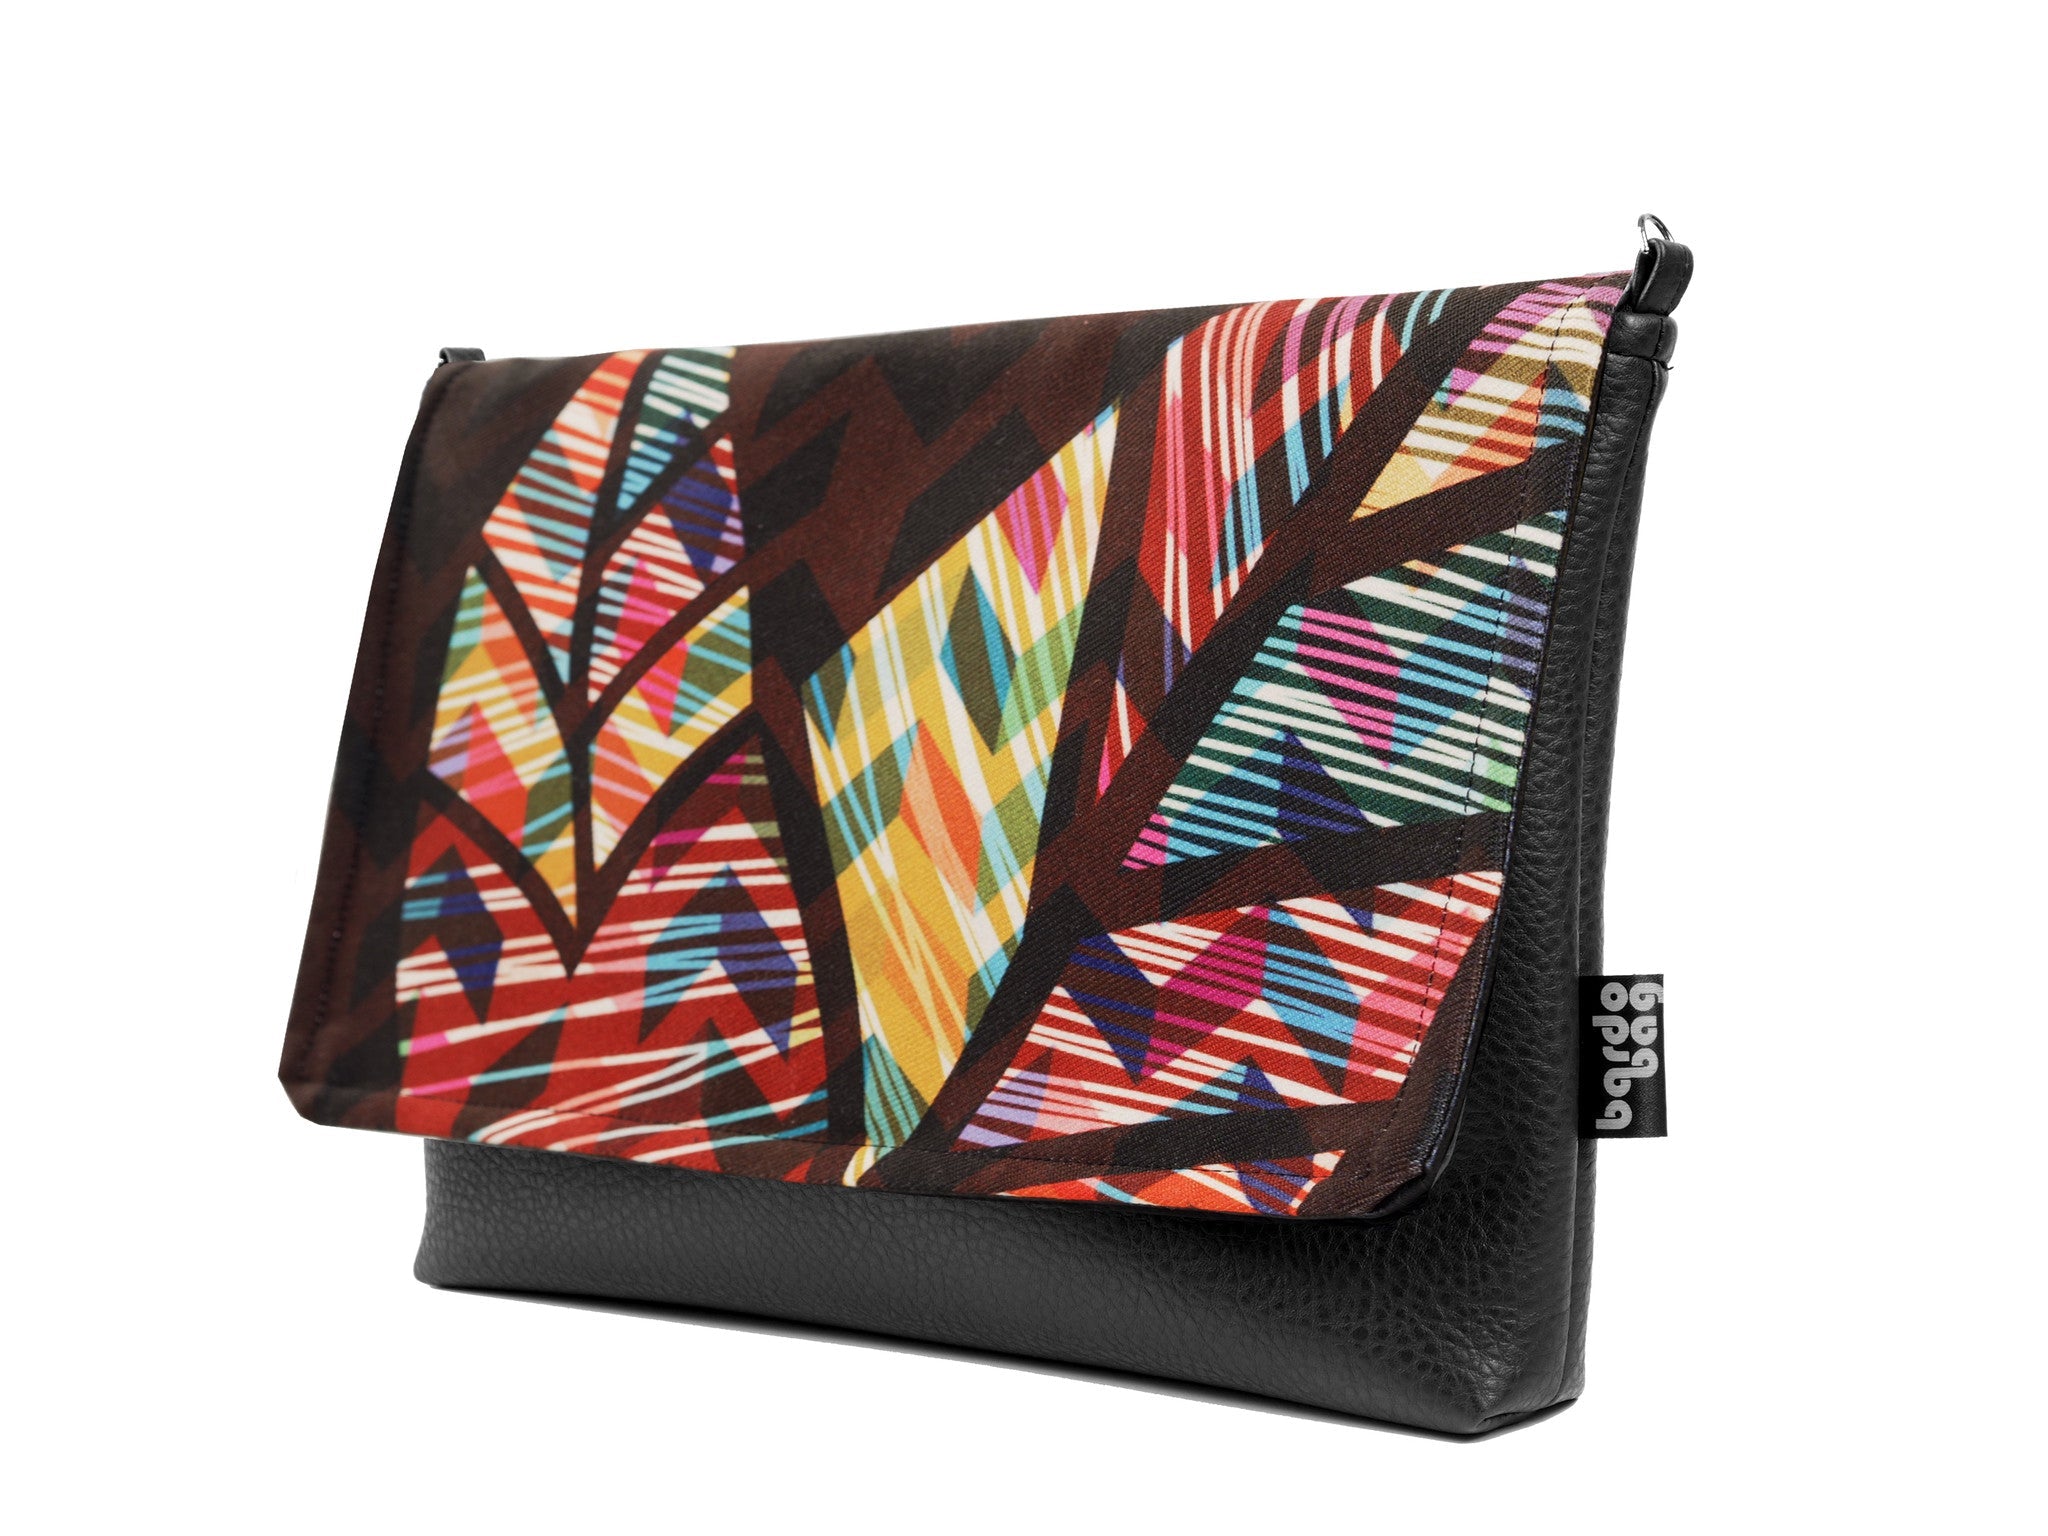 Bardo small bag - One whole - Premium Bardo small bag from BARDO ART WORKS - Just lvabstract, Art Print, black, blue, floral, gift, handemade, leaves, nature, orange, painted patterns, purple, red, urban style, vegan leather, woman, yellow55.00! Shop now at BARDO ART WORKS